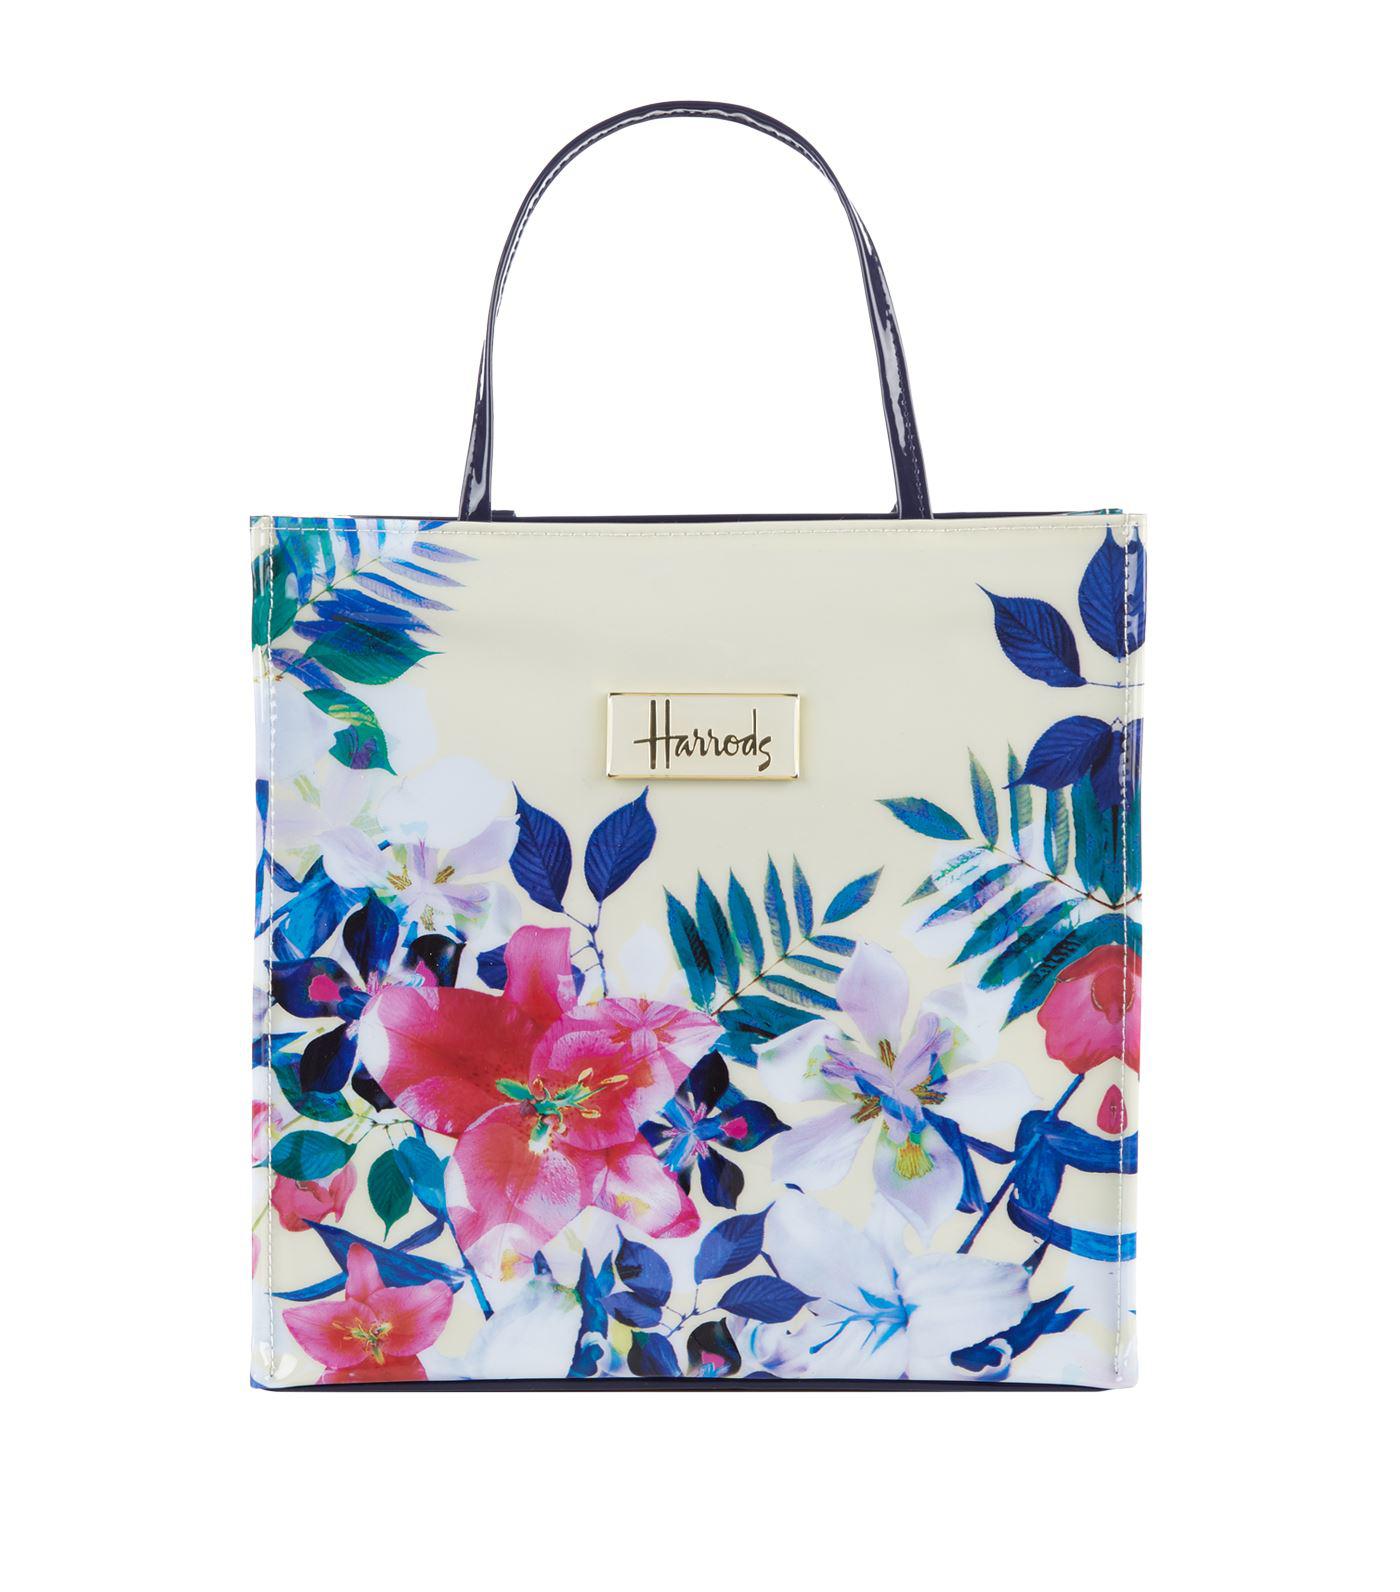 Harrods Small Tropical Floral Shopper Bag in Blue - Lyst